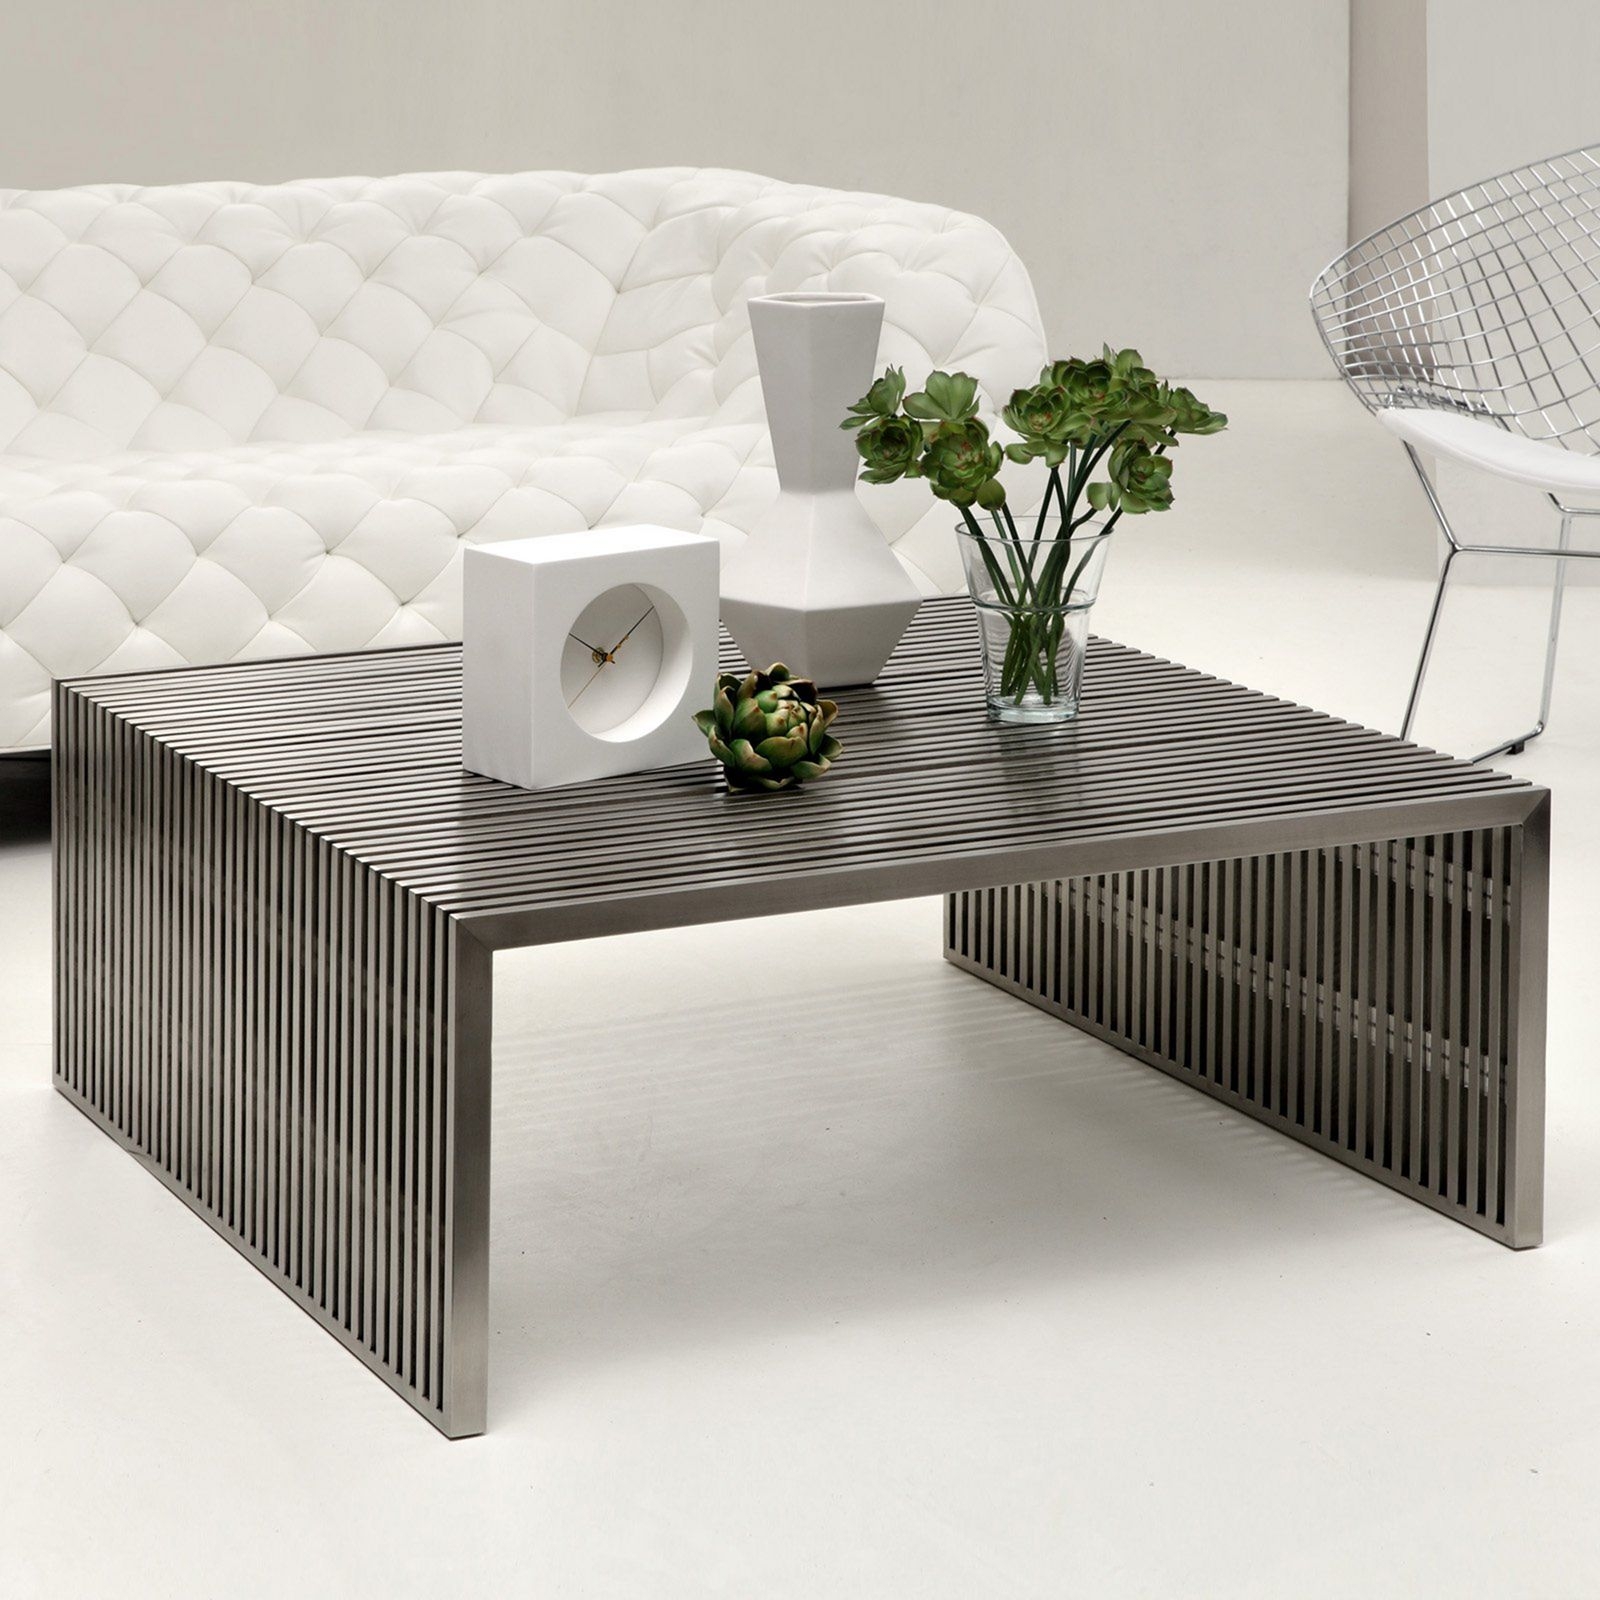 Mod Made Cubellis Stainless Steel Square Coffee Table